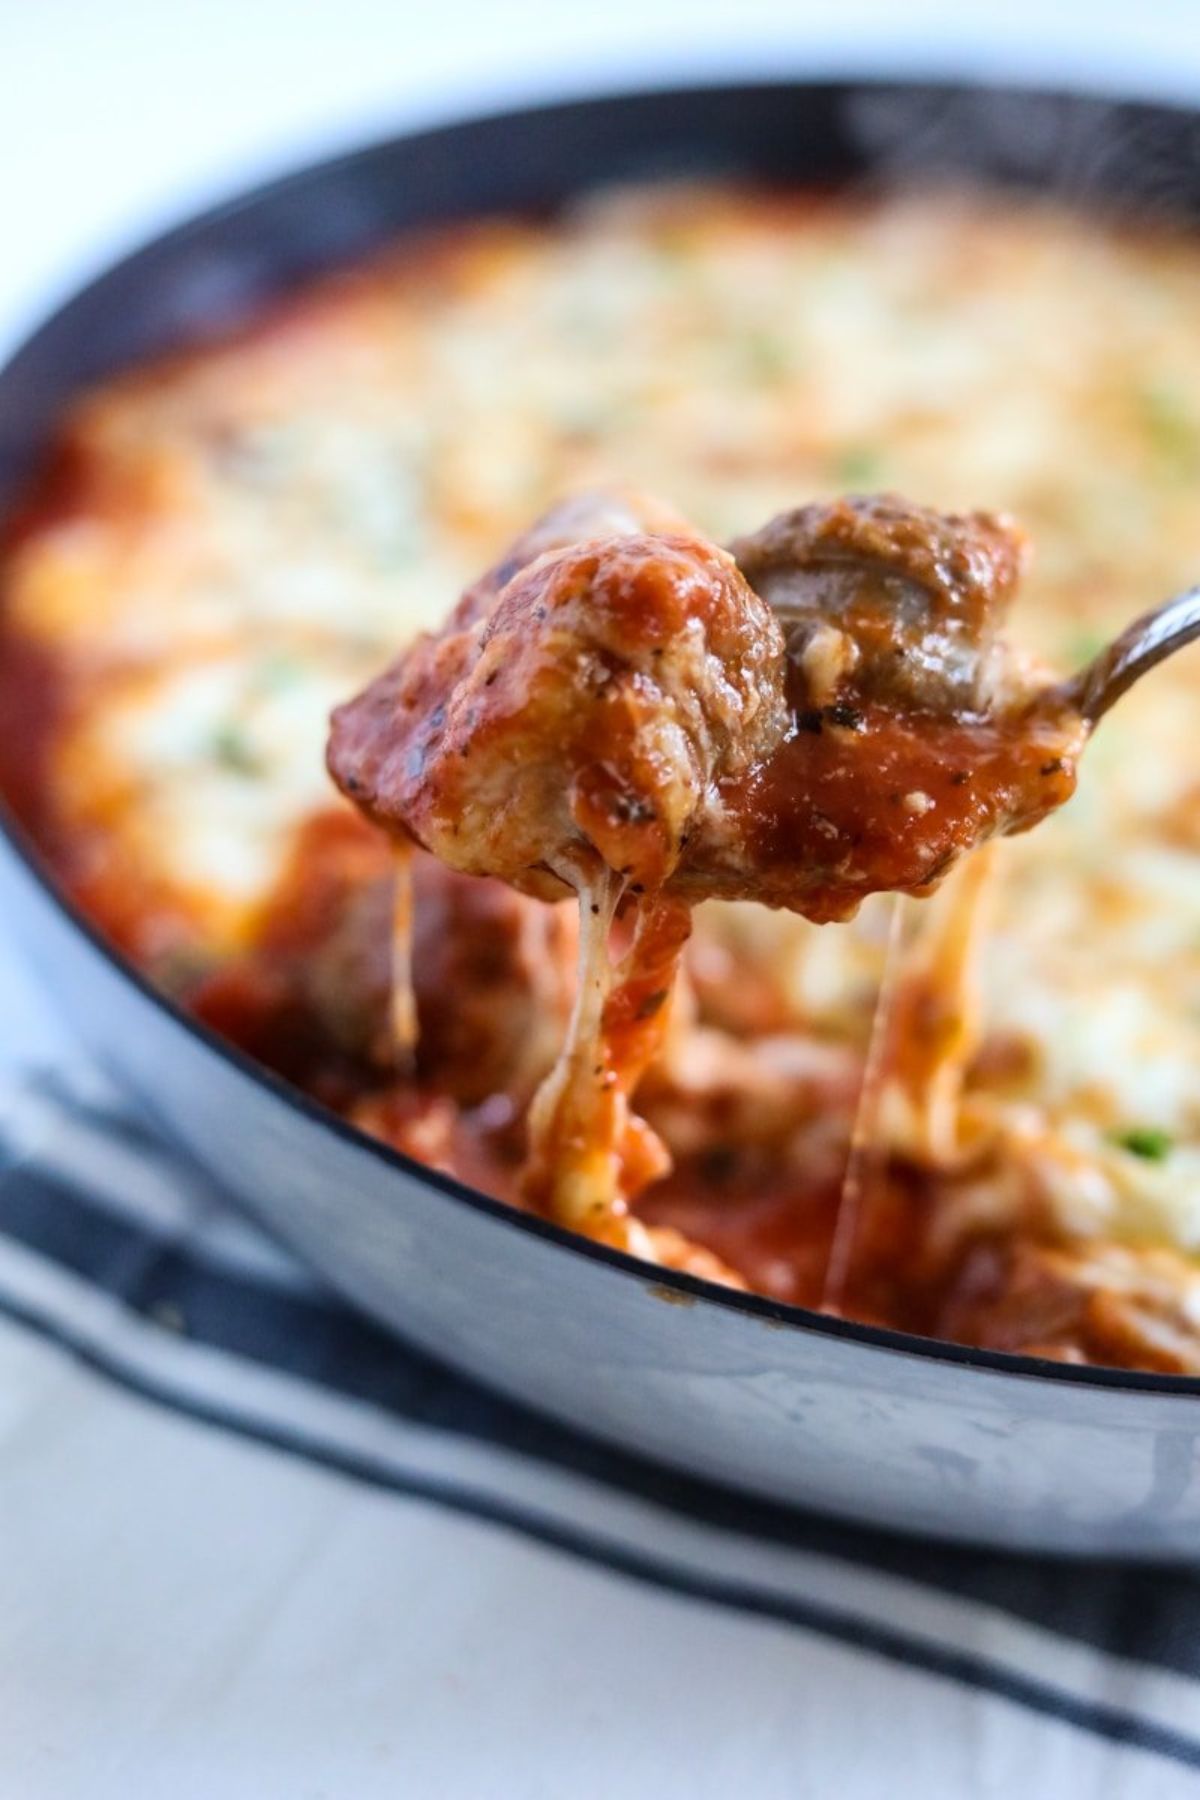 a blurred shot of bowl of casserole. A metal spoon is lifting a mouthful of cheese-coverd meat out of the bowl